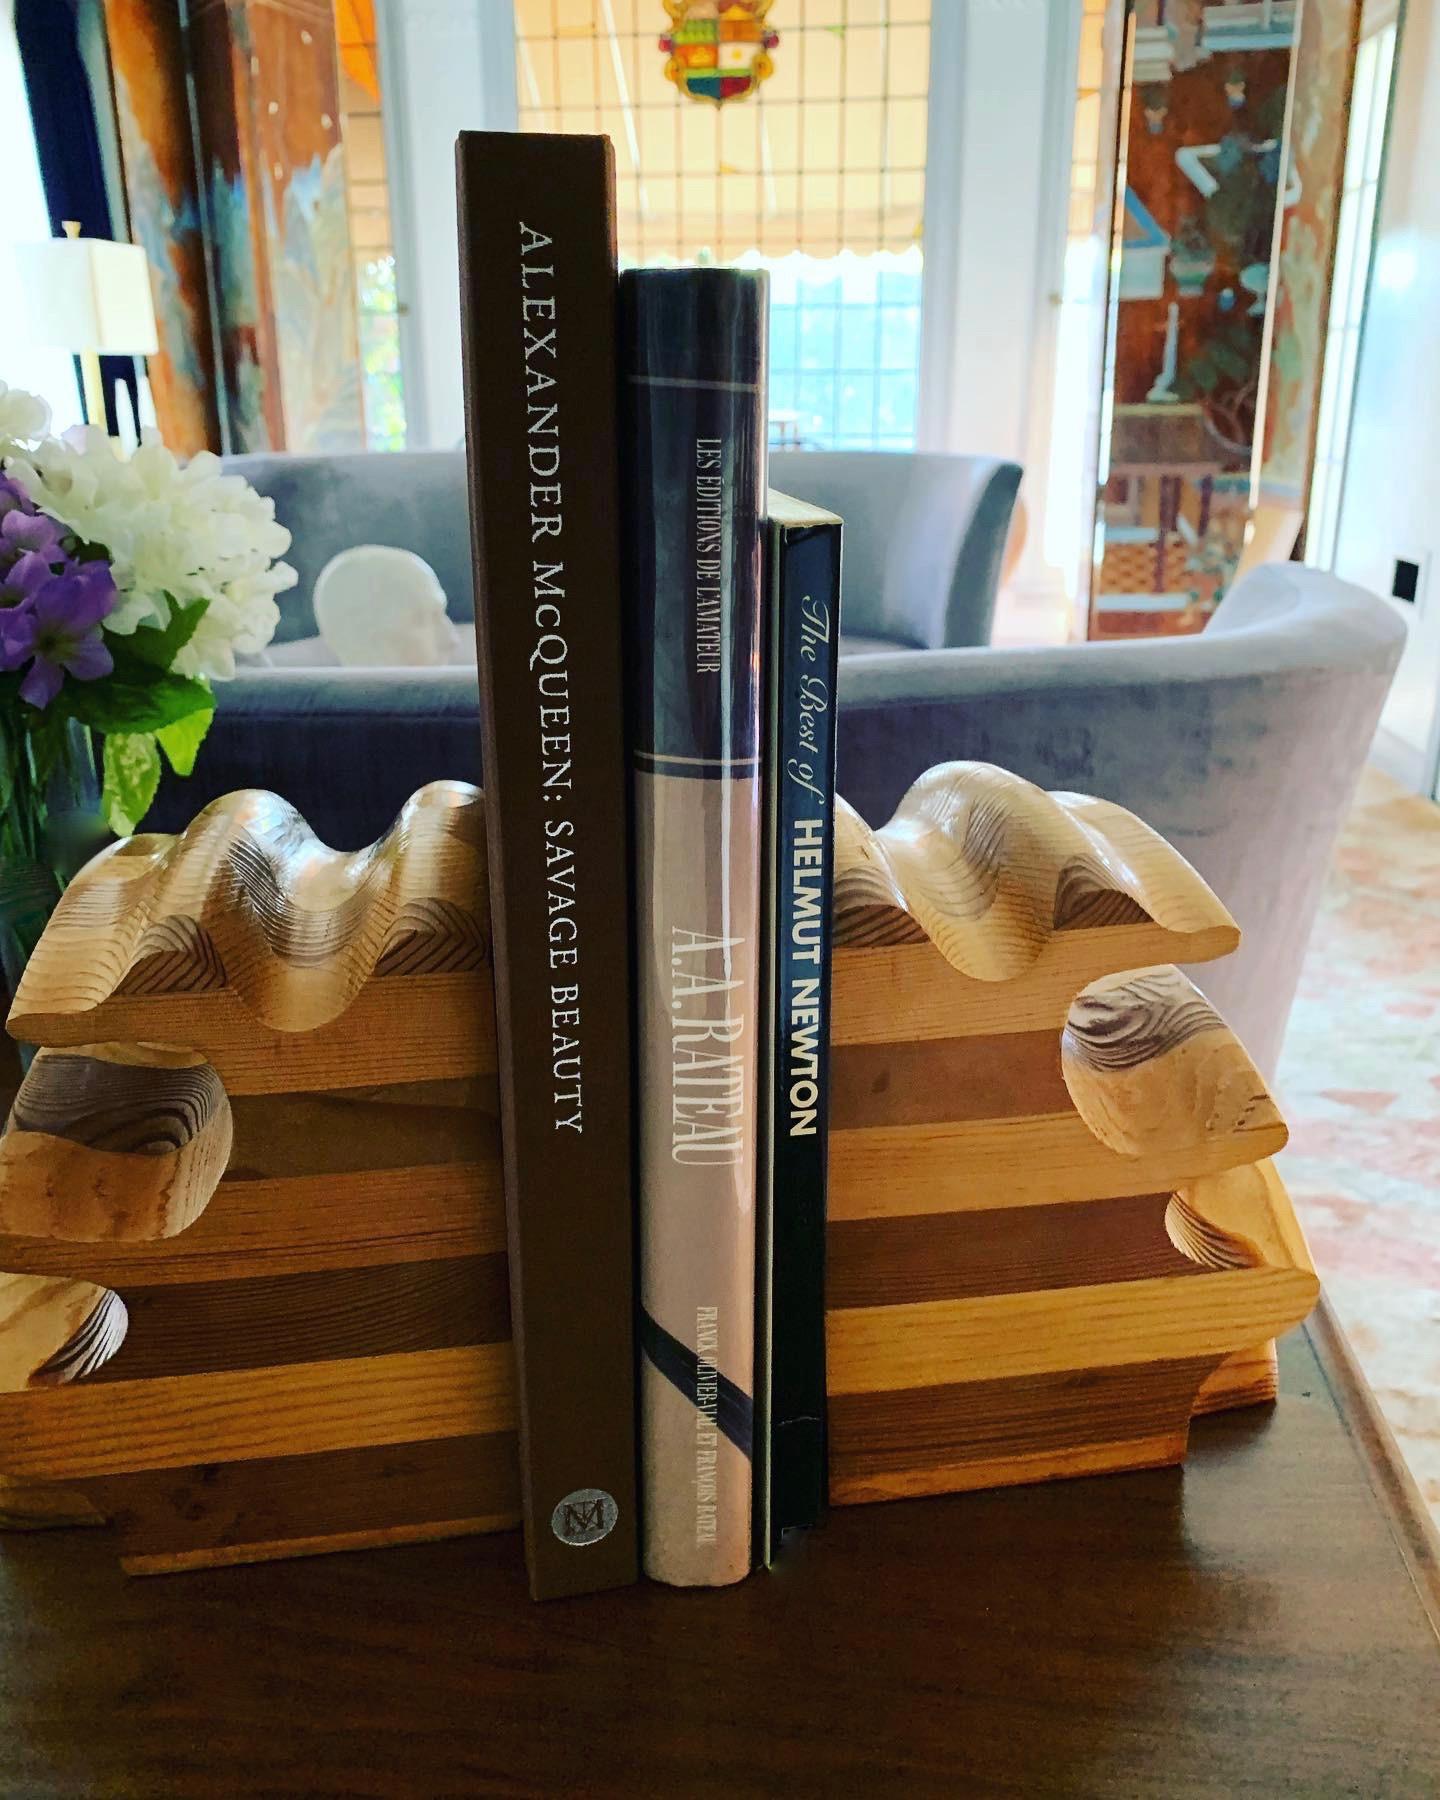 A remarkable pair of handmade wooden bookends using layers and cuts to create a spectacular shape... perfect for any setting with books... modern, organic or traditional. These may be by Don Shoemaker.